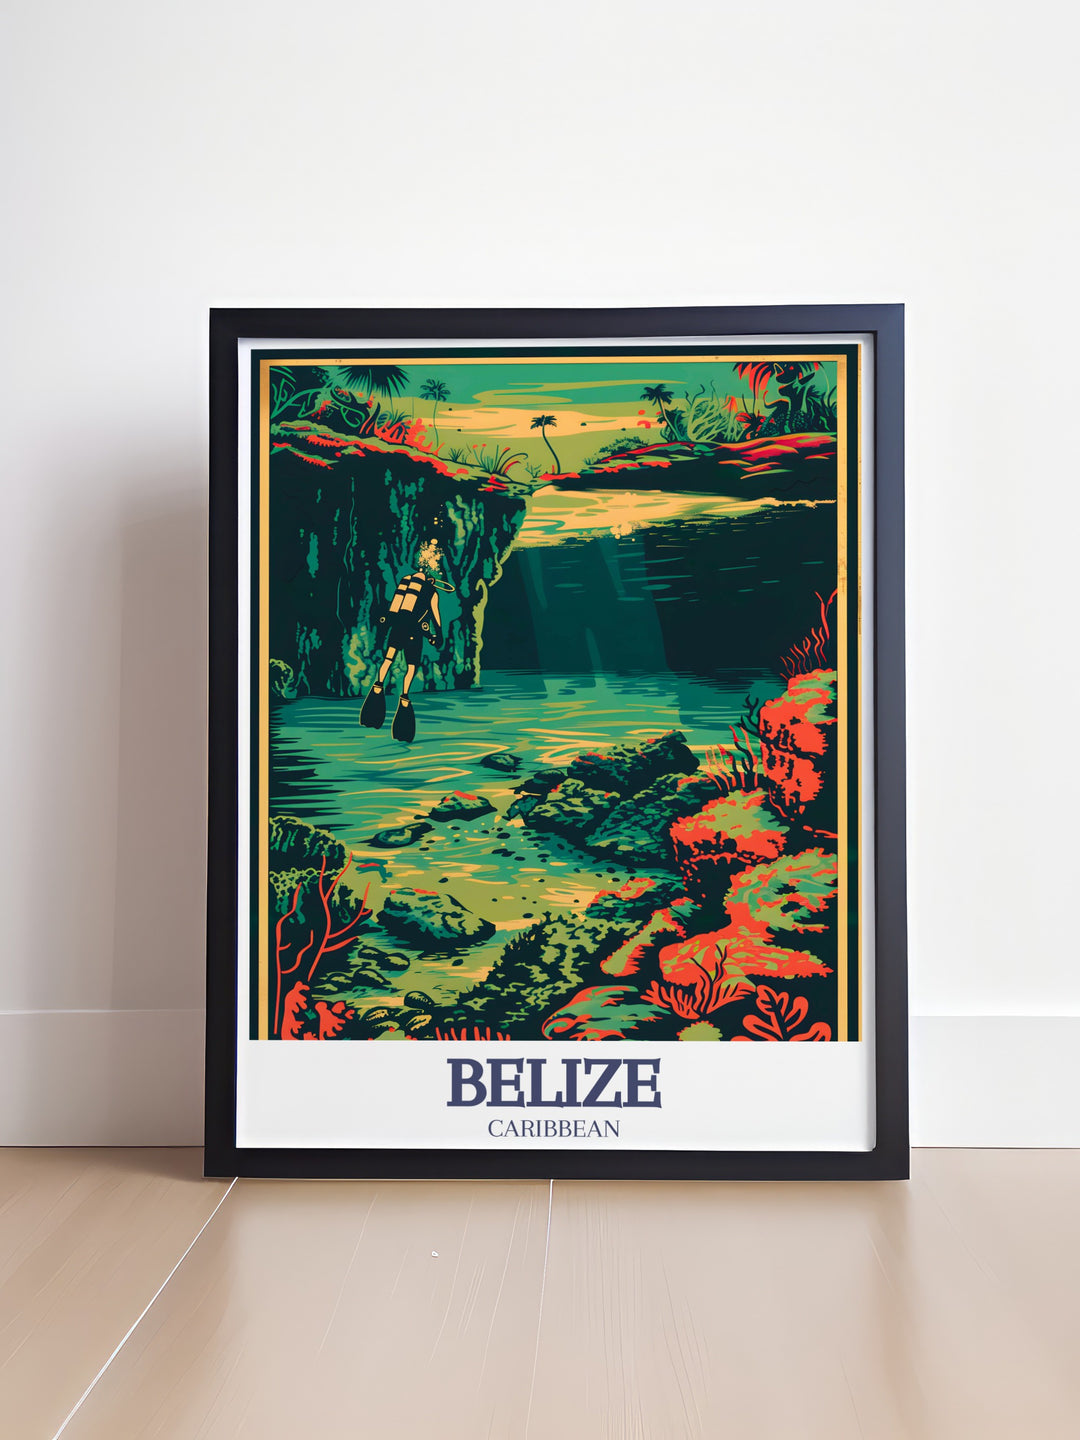 High quality Blue Hole Belize Barrier Reef modern art print featuring detailed and lifelike representation of the vibrant marine life and stunning coastline perfect for enhancing any home or office space